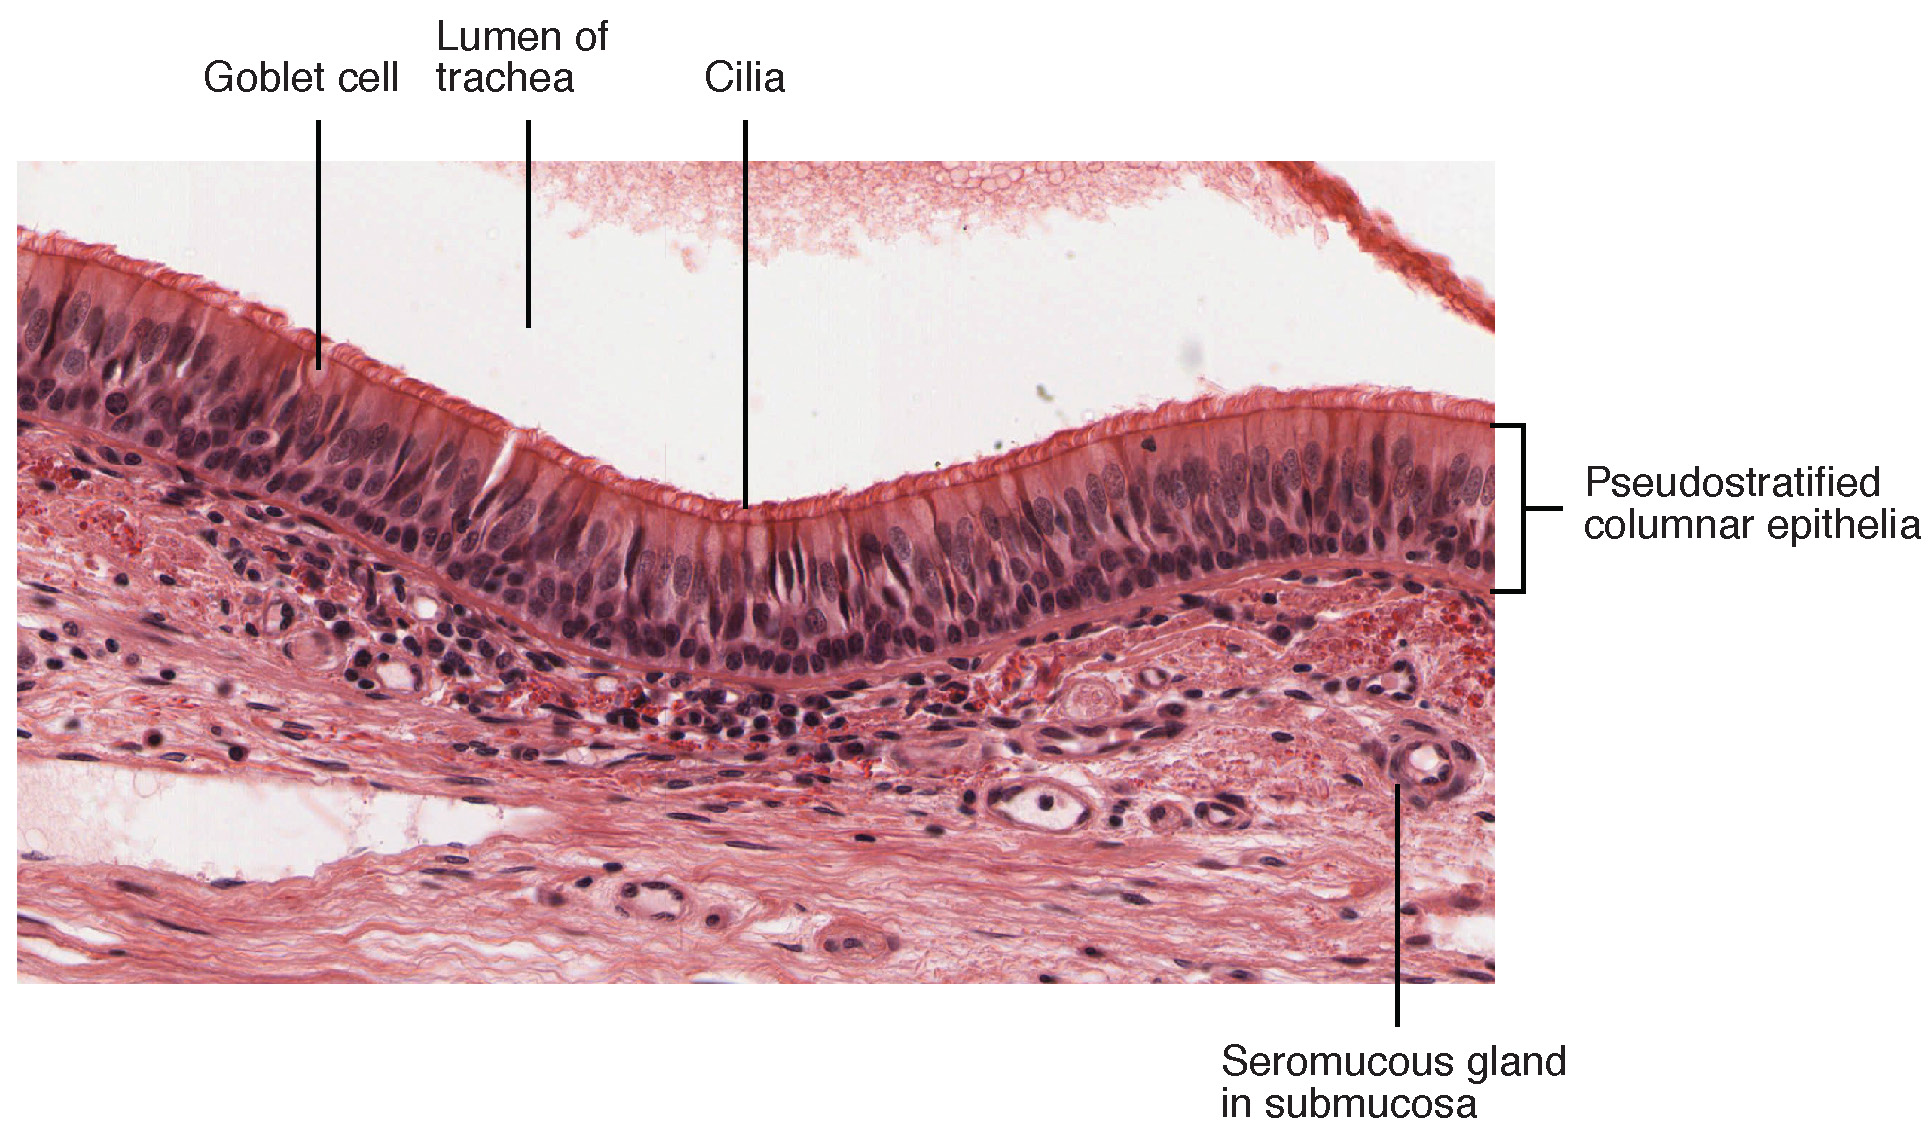 This section shows epithelial tissues that are pseudostratified. Epithelial cells appear to be in layers. But in actual fact, they are not.